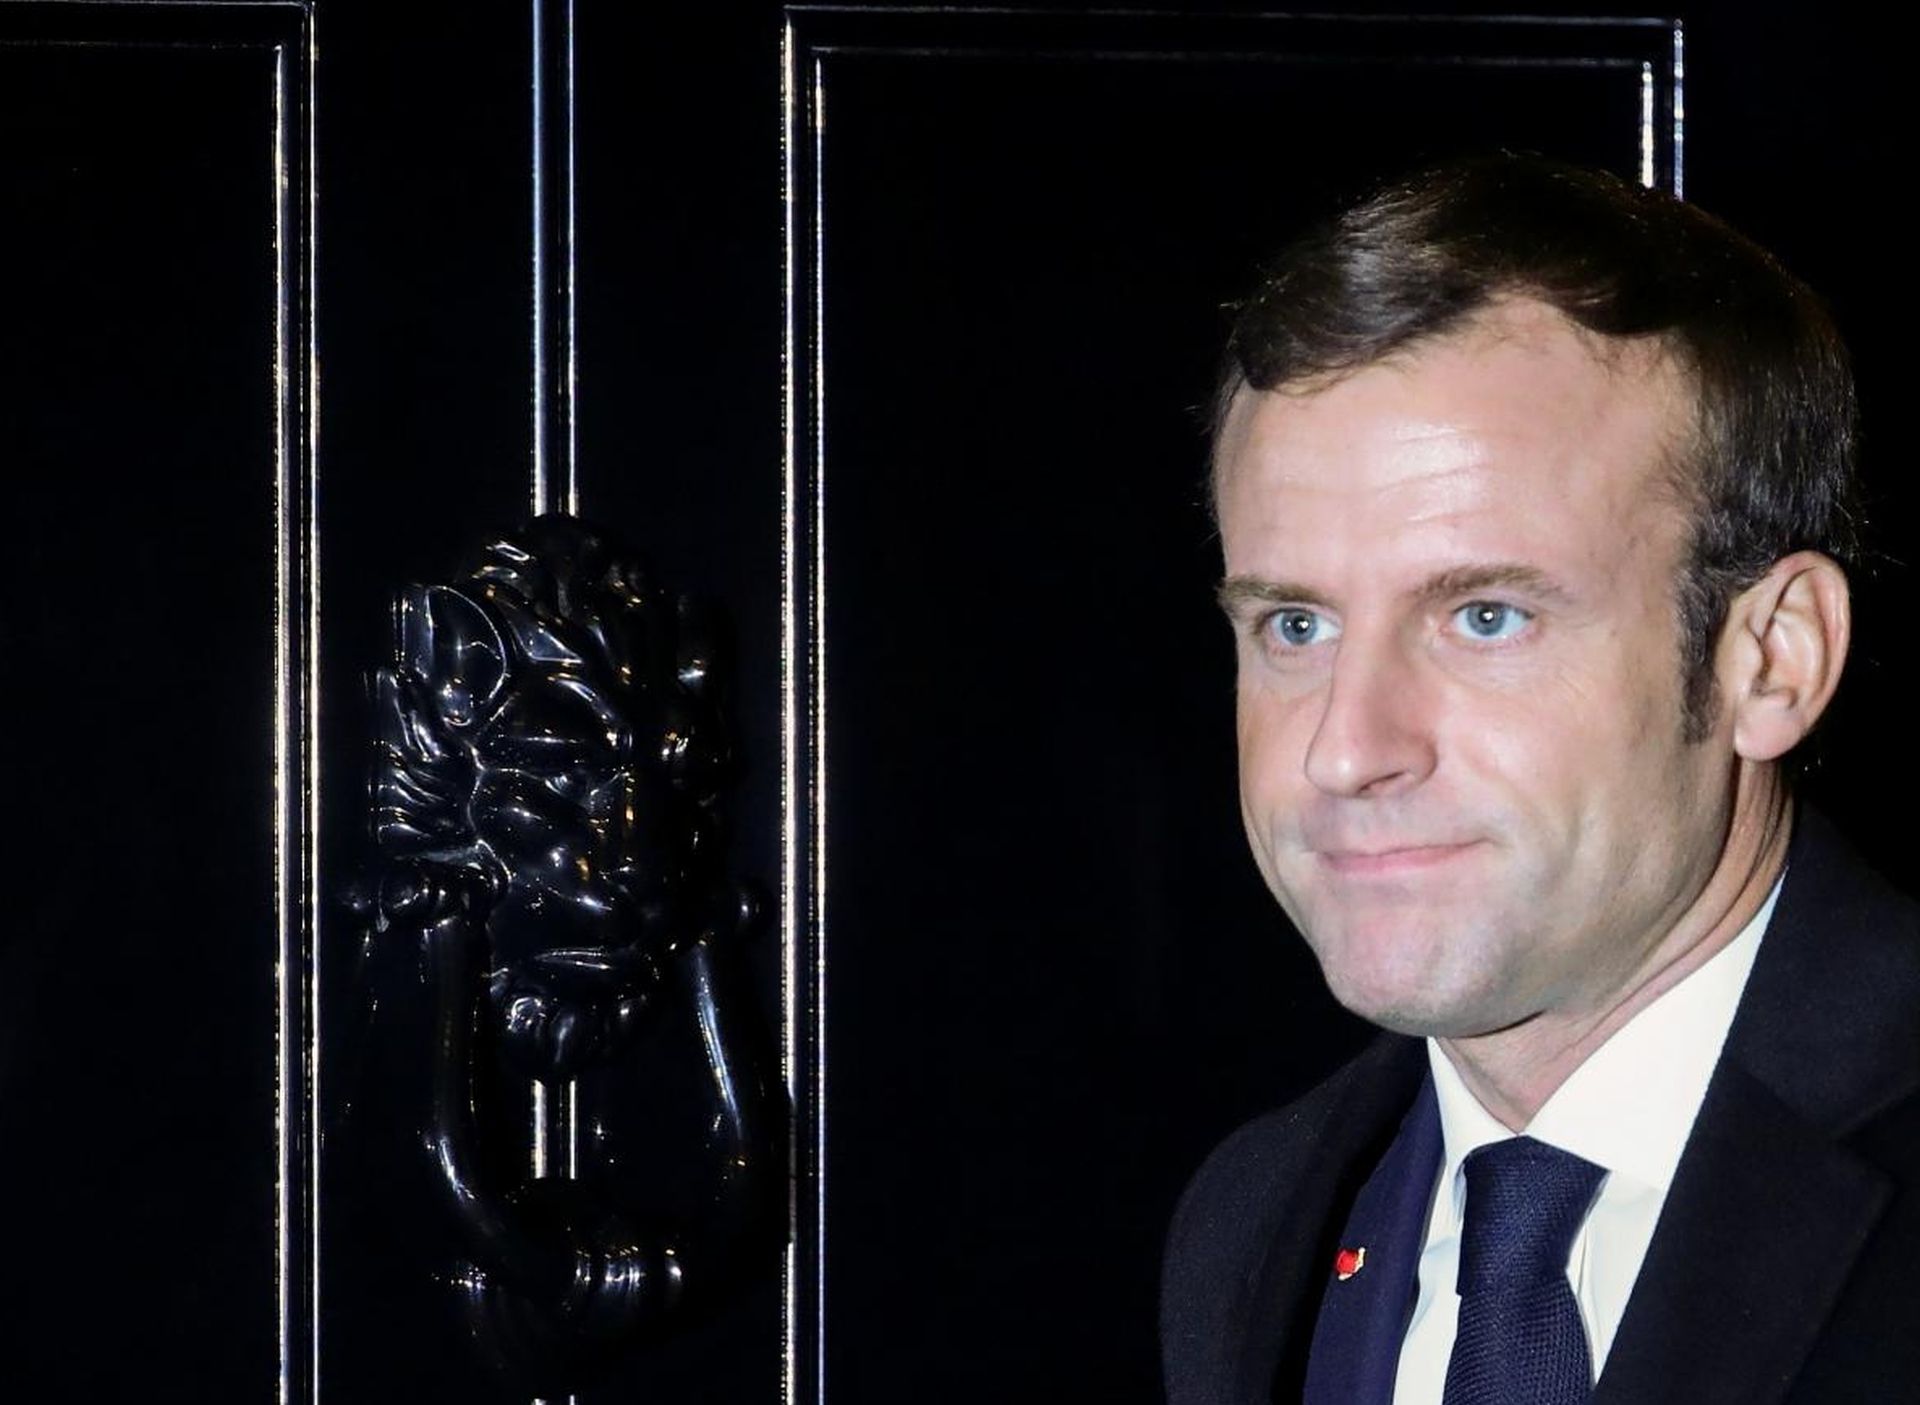 NATO leaders meet at Downing Street in London France's President Emmanuel Macron leaves Downing Street after talks with Britain's Prime Minister Boris Johnson, ahead of the NATO summit in Watford, in London, Britain, December 3, 2019. REUTERS/Lisi Niesner     TPX IMAGES OF THE DAY Lisi Niesner